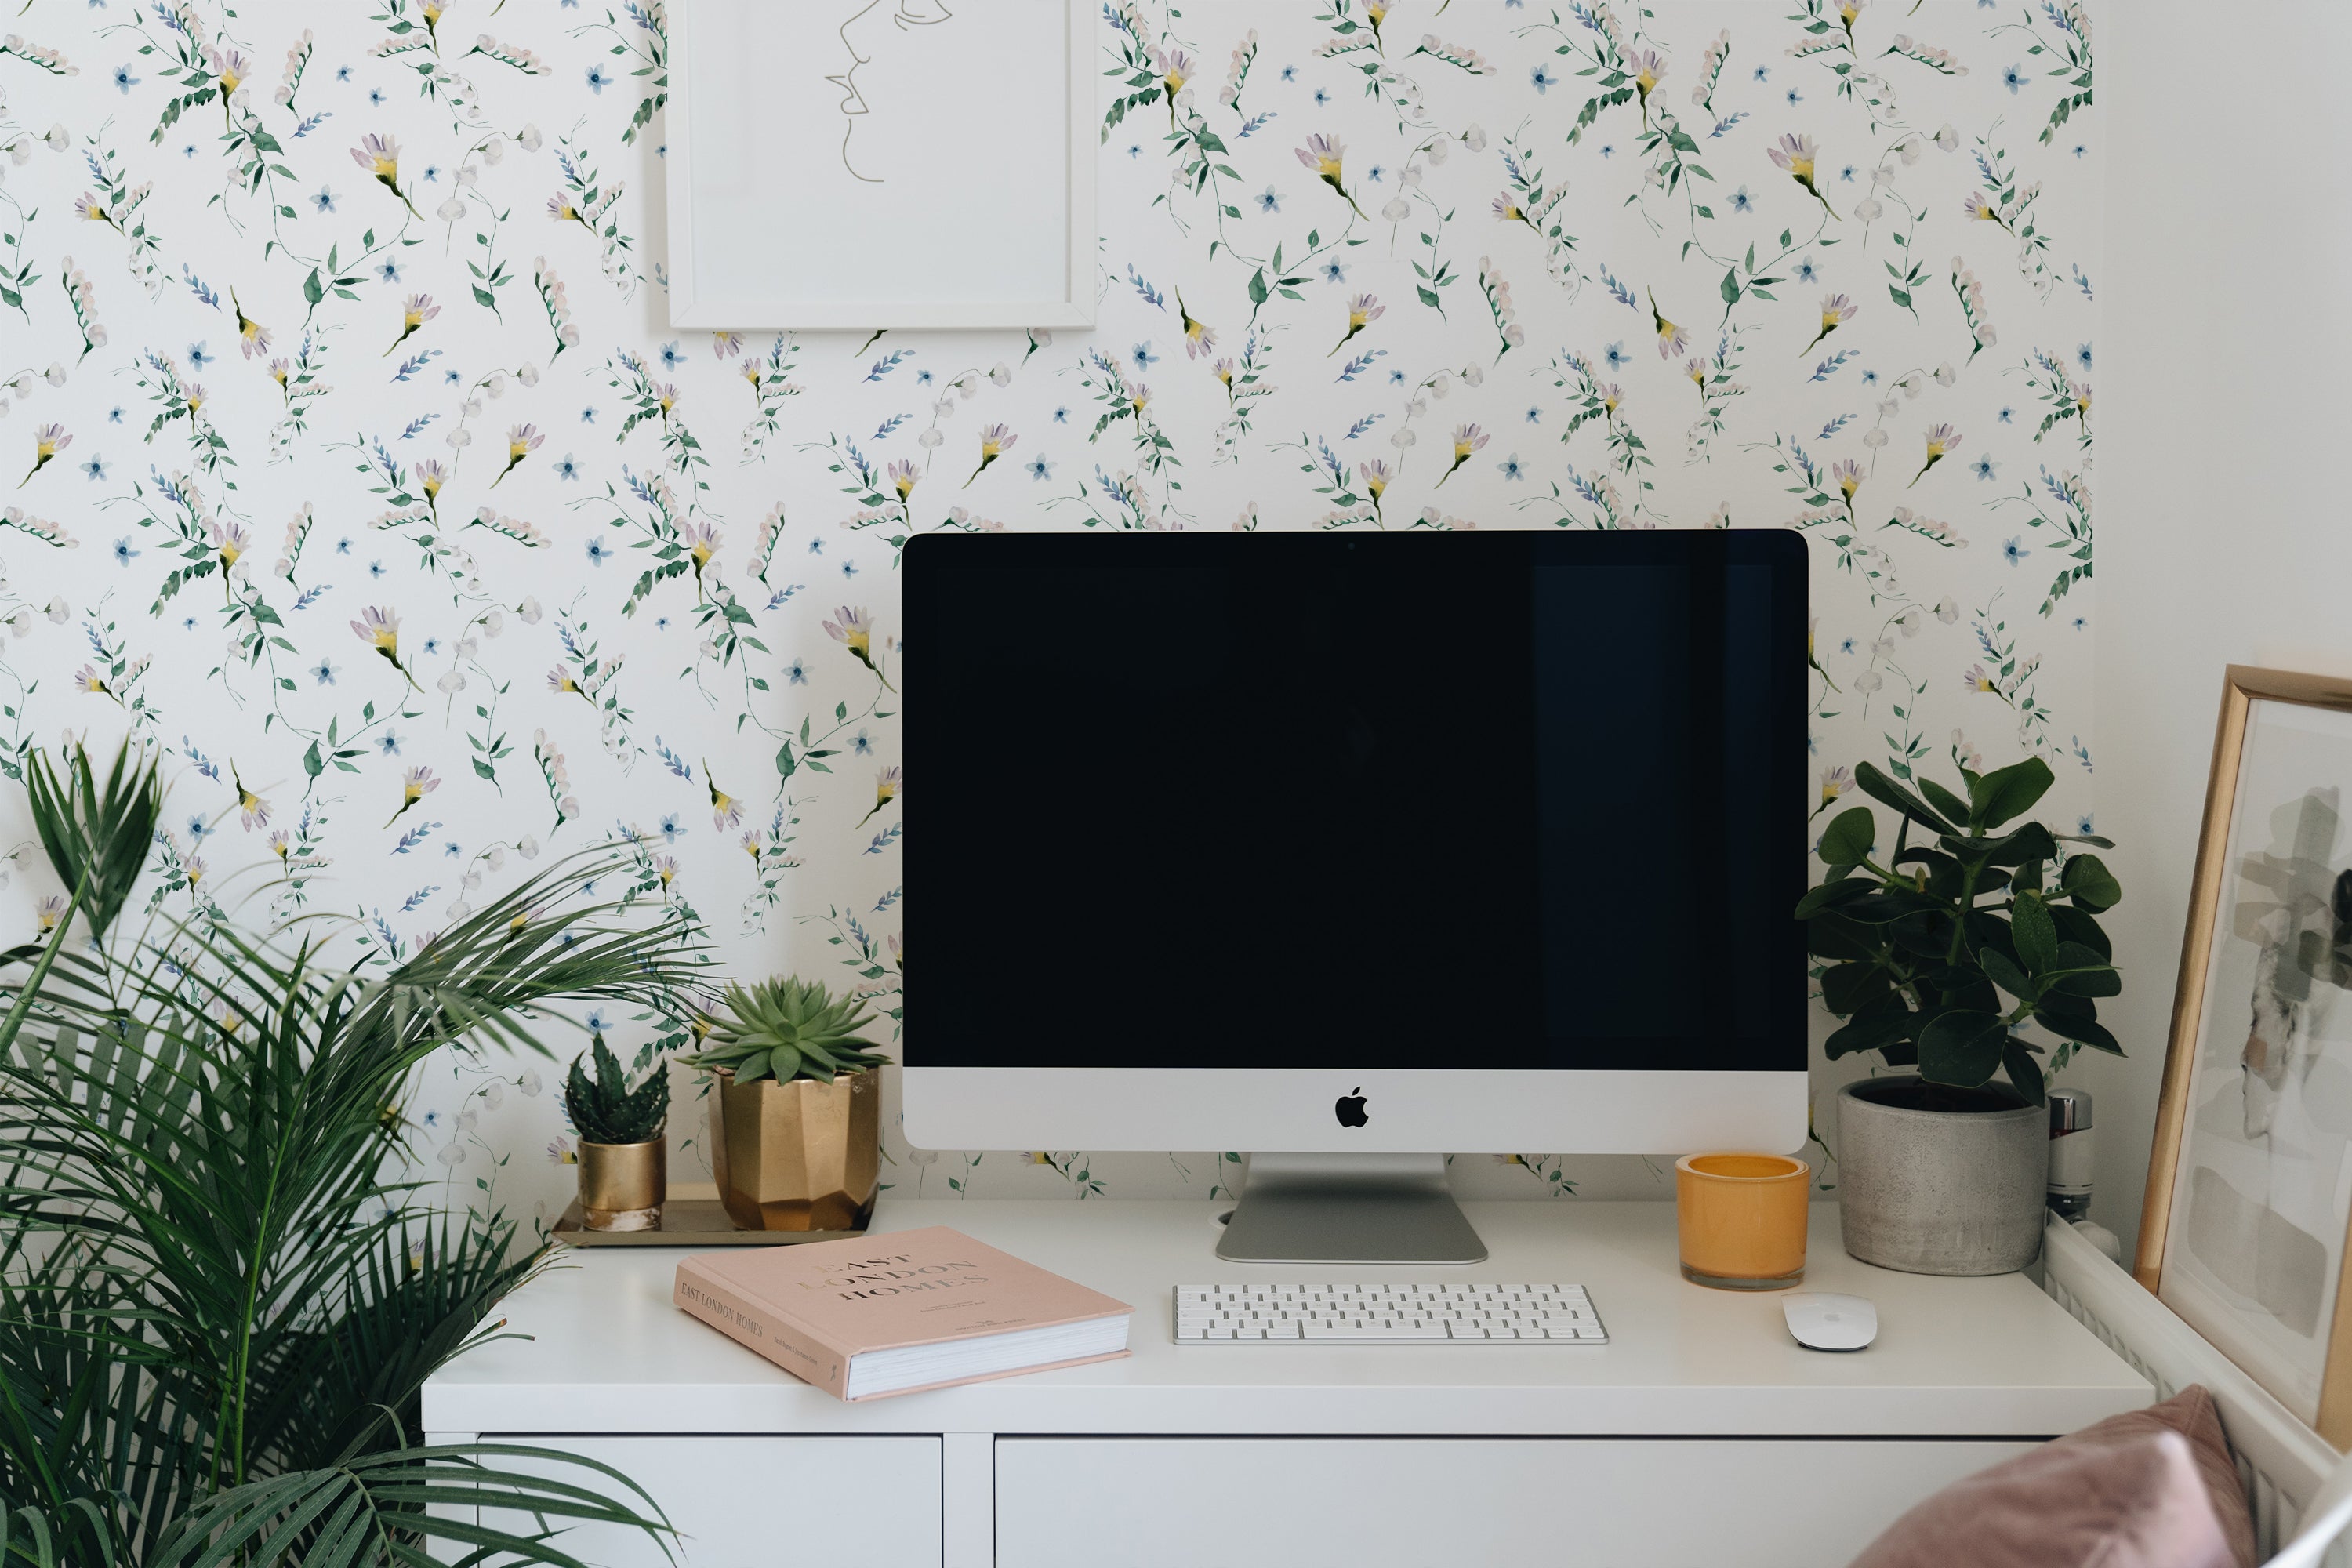 A serene workspace enhanced by the Blossom Breeze Wallpaper featuring delicate floral patterns with tiny blue and yellow flowers and green leaves against a white background. The vibrant natural theme complements the modern desktop setting, surrounded by lush indoor plants and stylish decor.